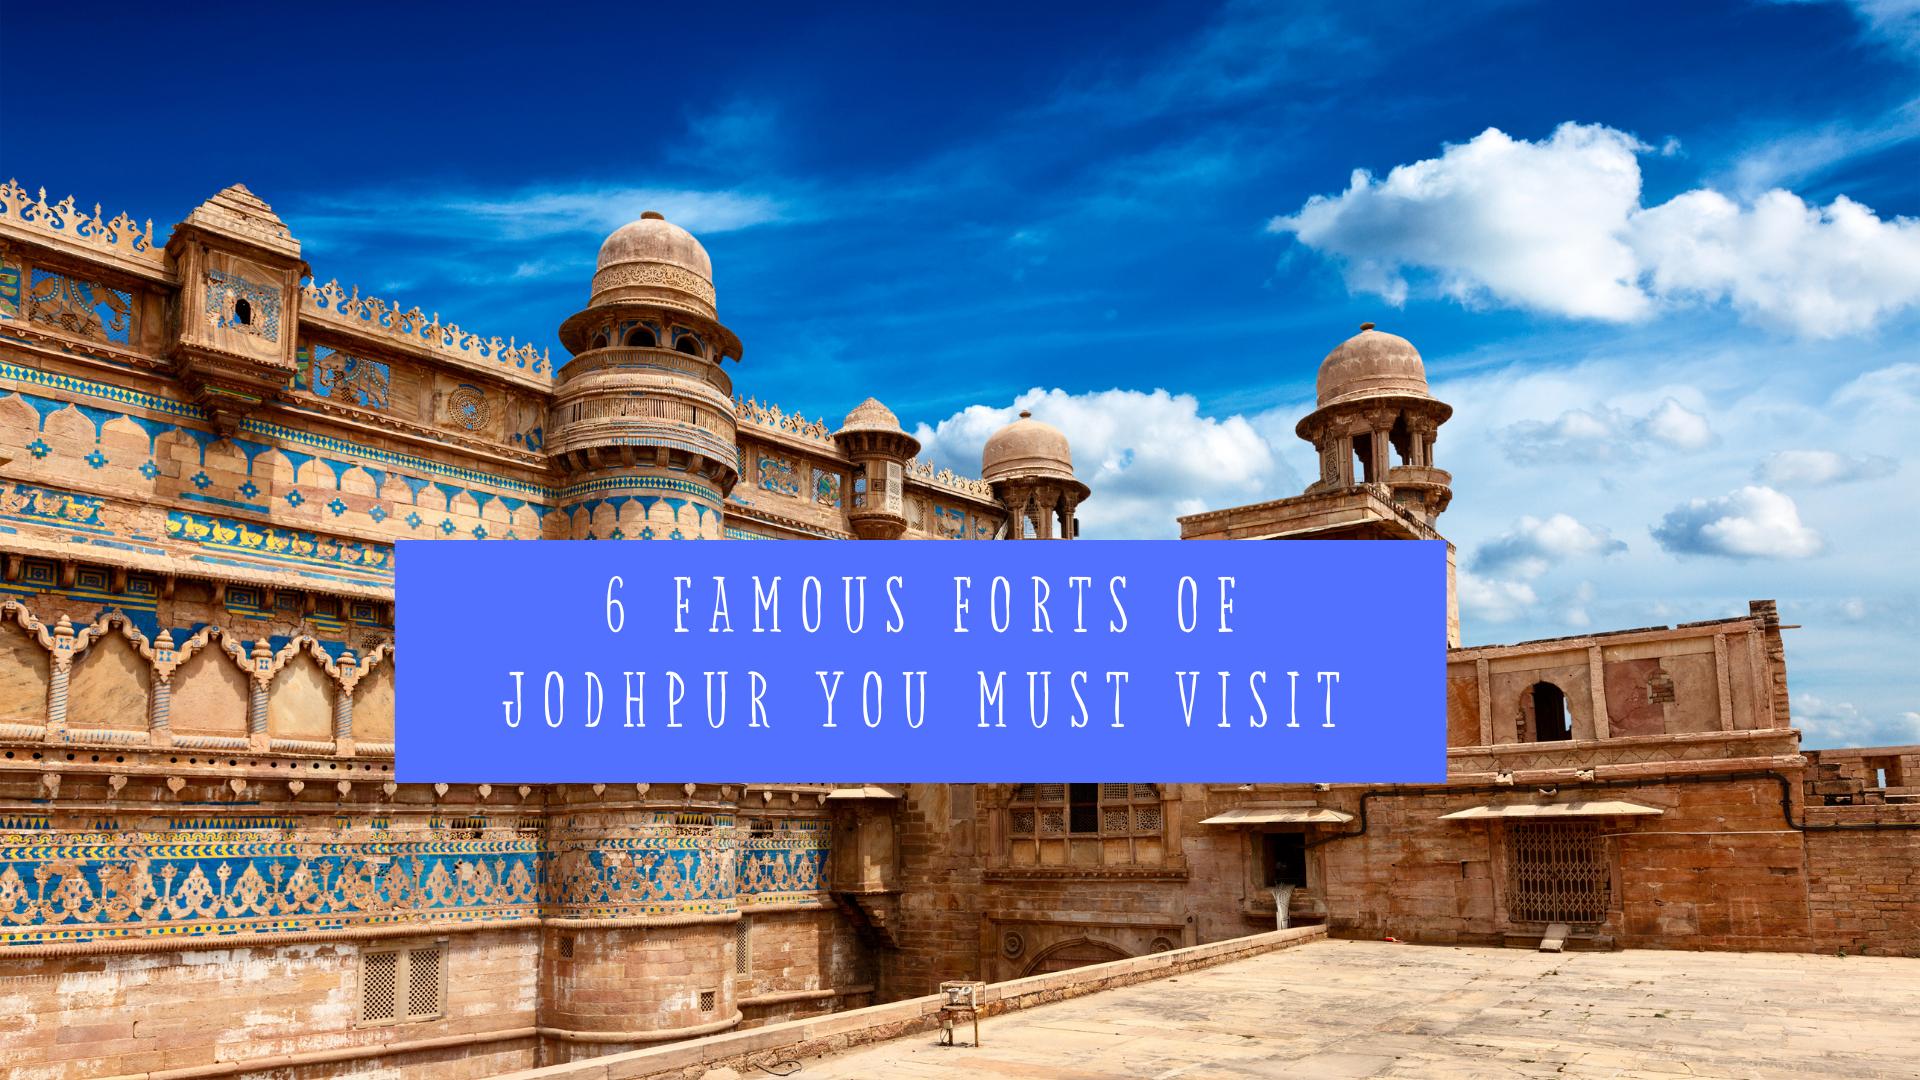 6 Famous Forts of Jodhpur You Must Visit